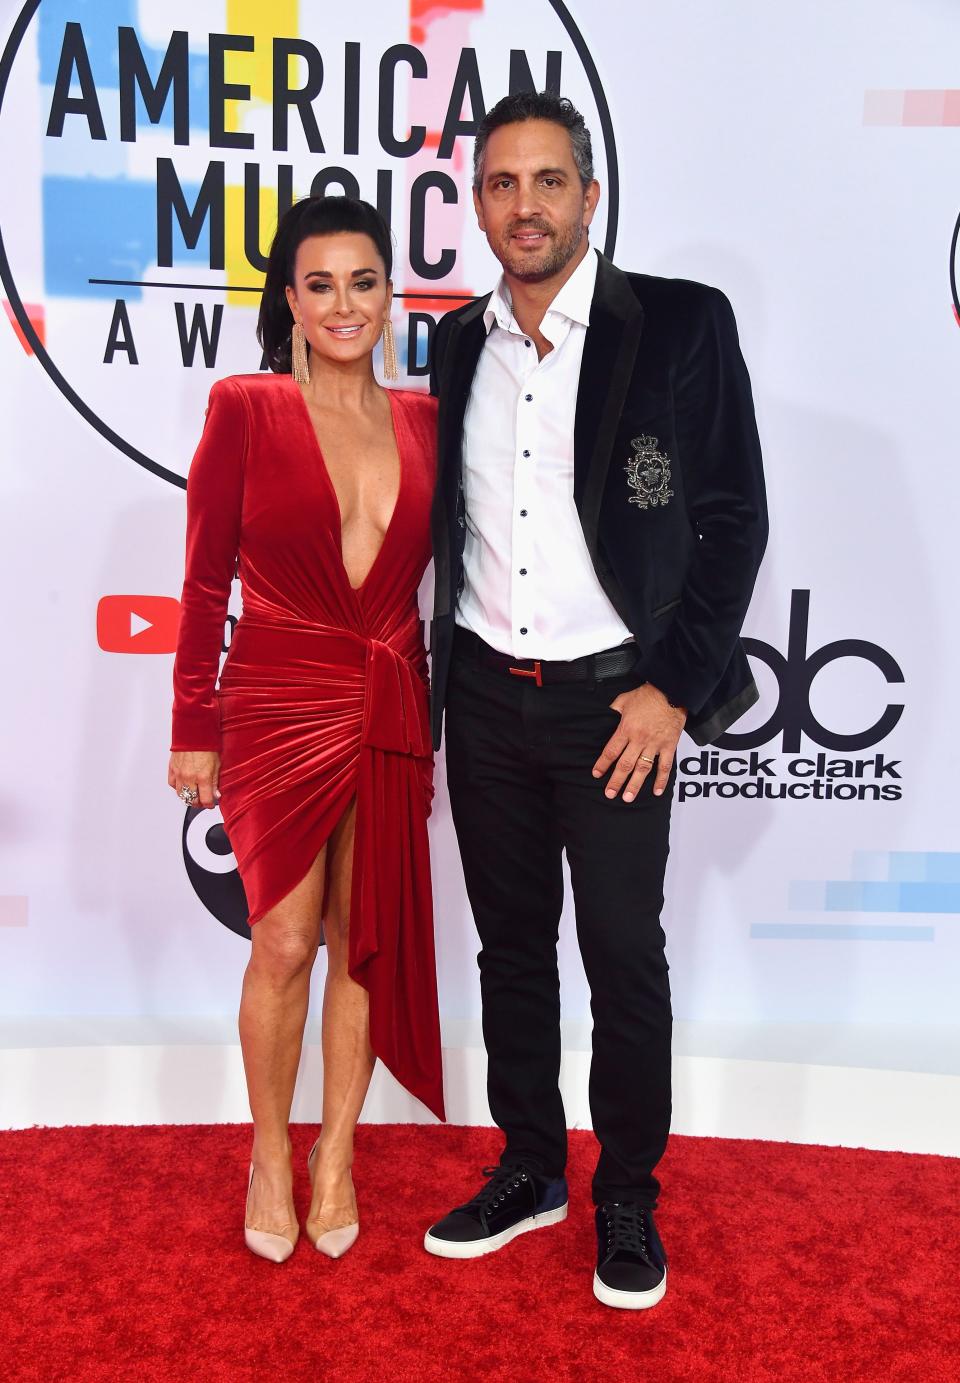 Kyle Richards and Mauricio Umansky attend the 2018 American Music Awards in Los Angeles.